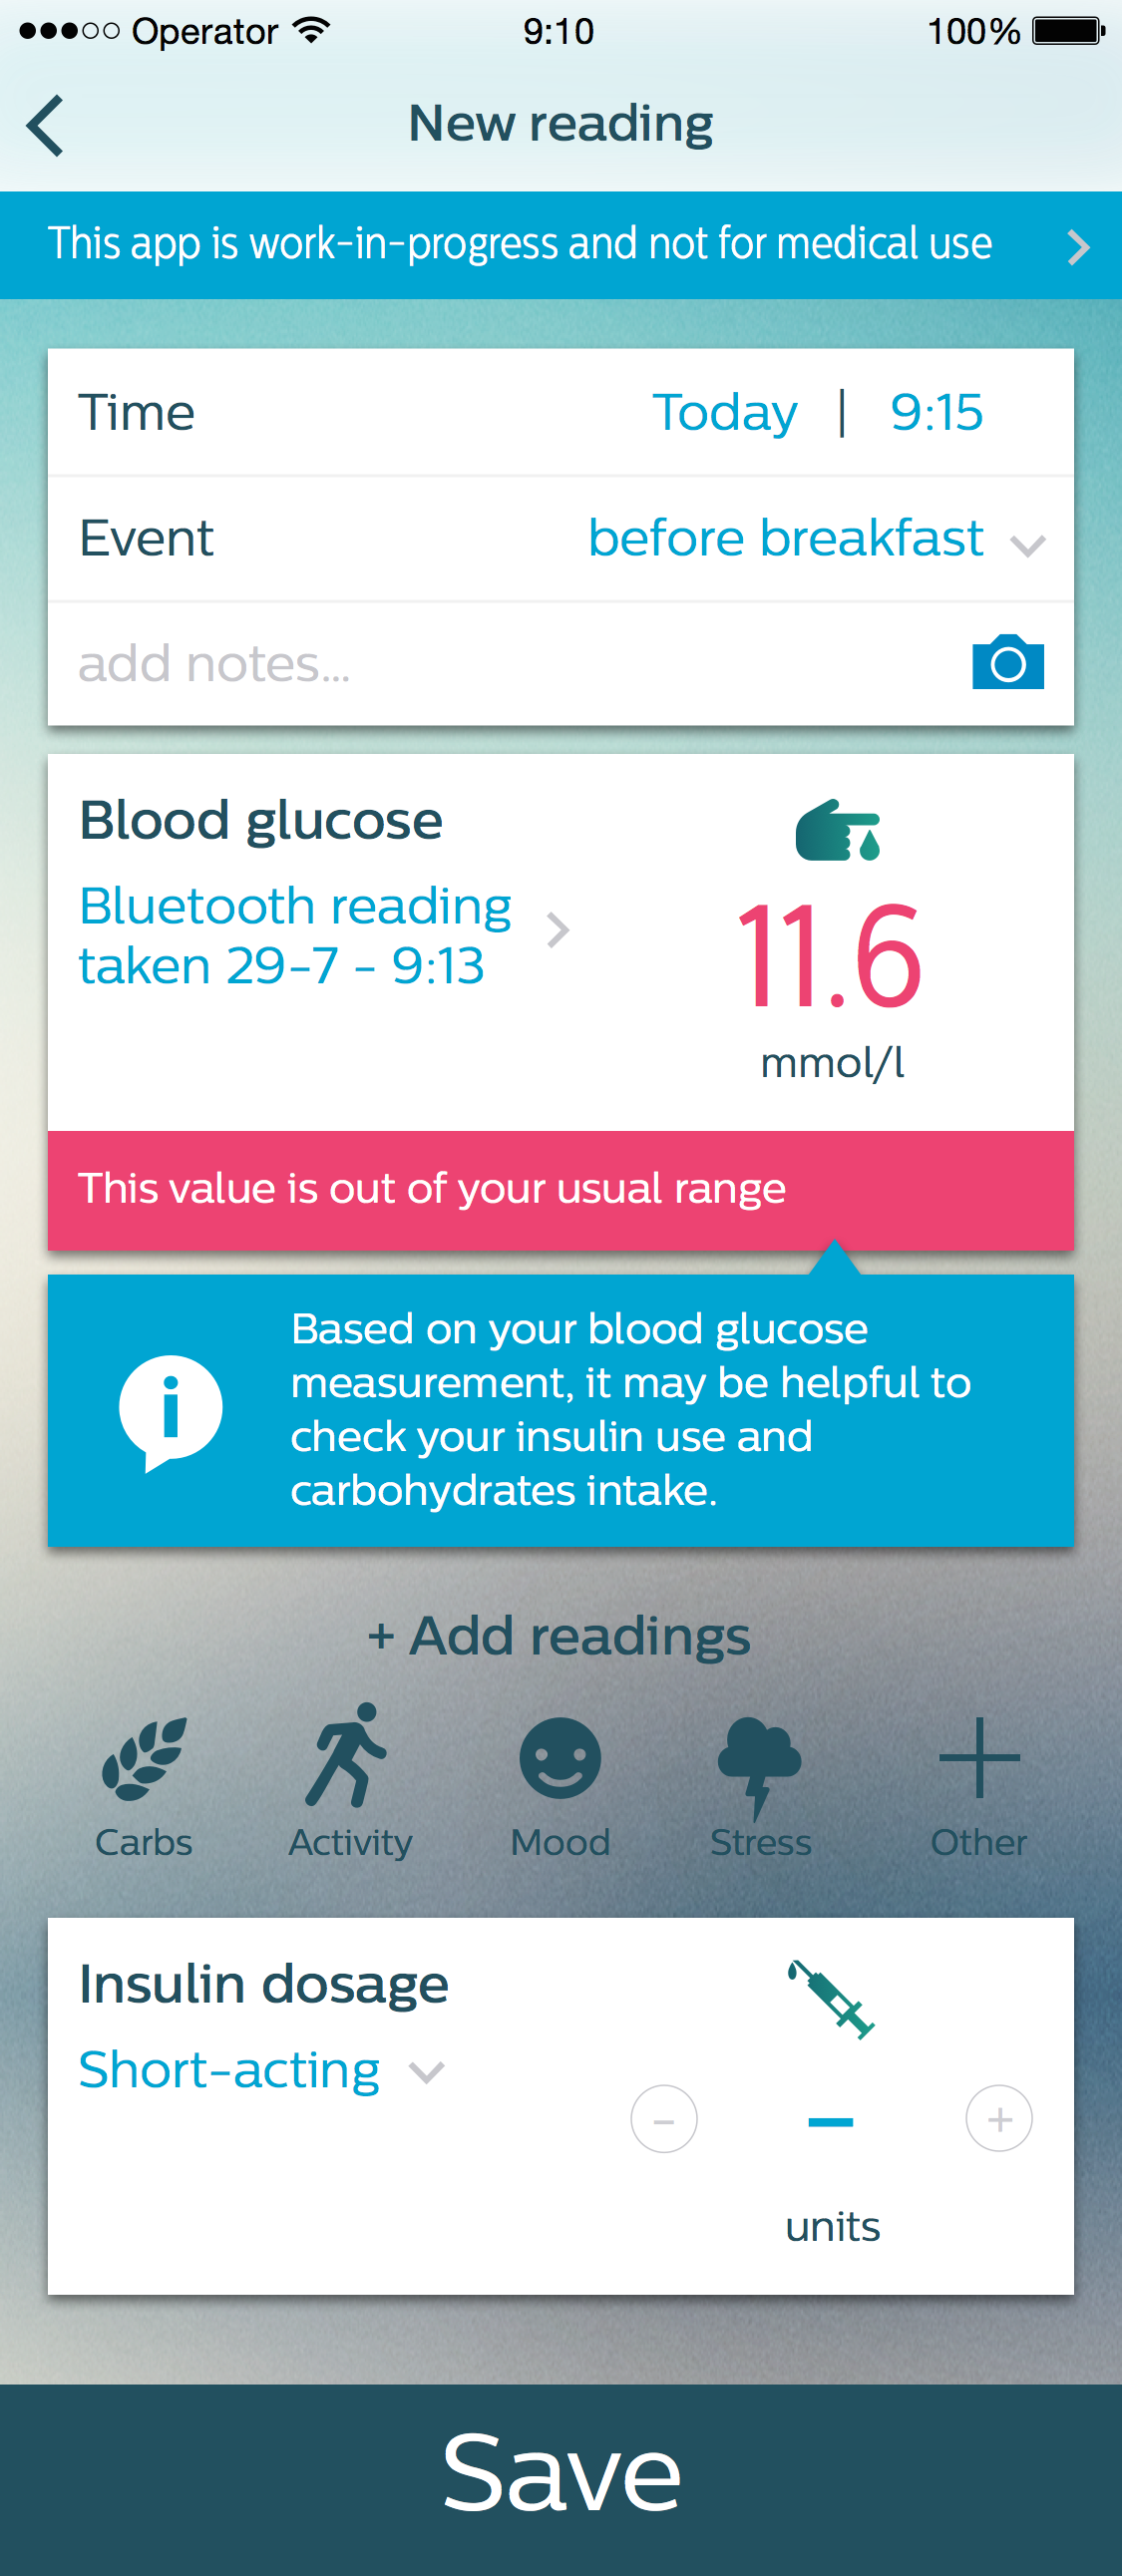 "Philips diabetes app - data entry coaching message 2" Photo by Phillips Communications CC BY-NC-ND 2.0